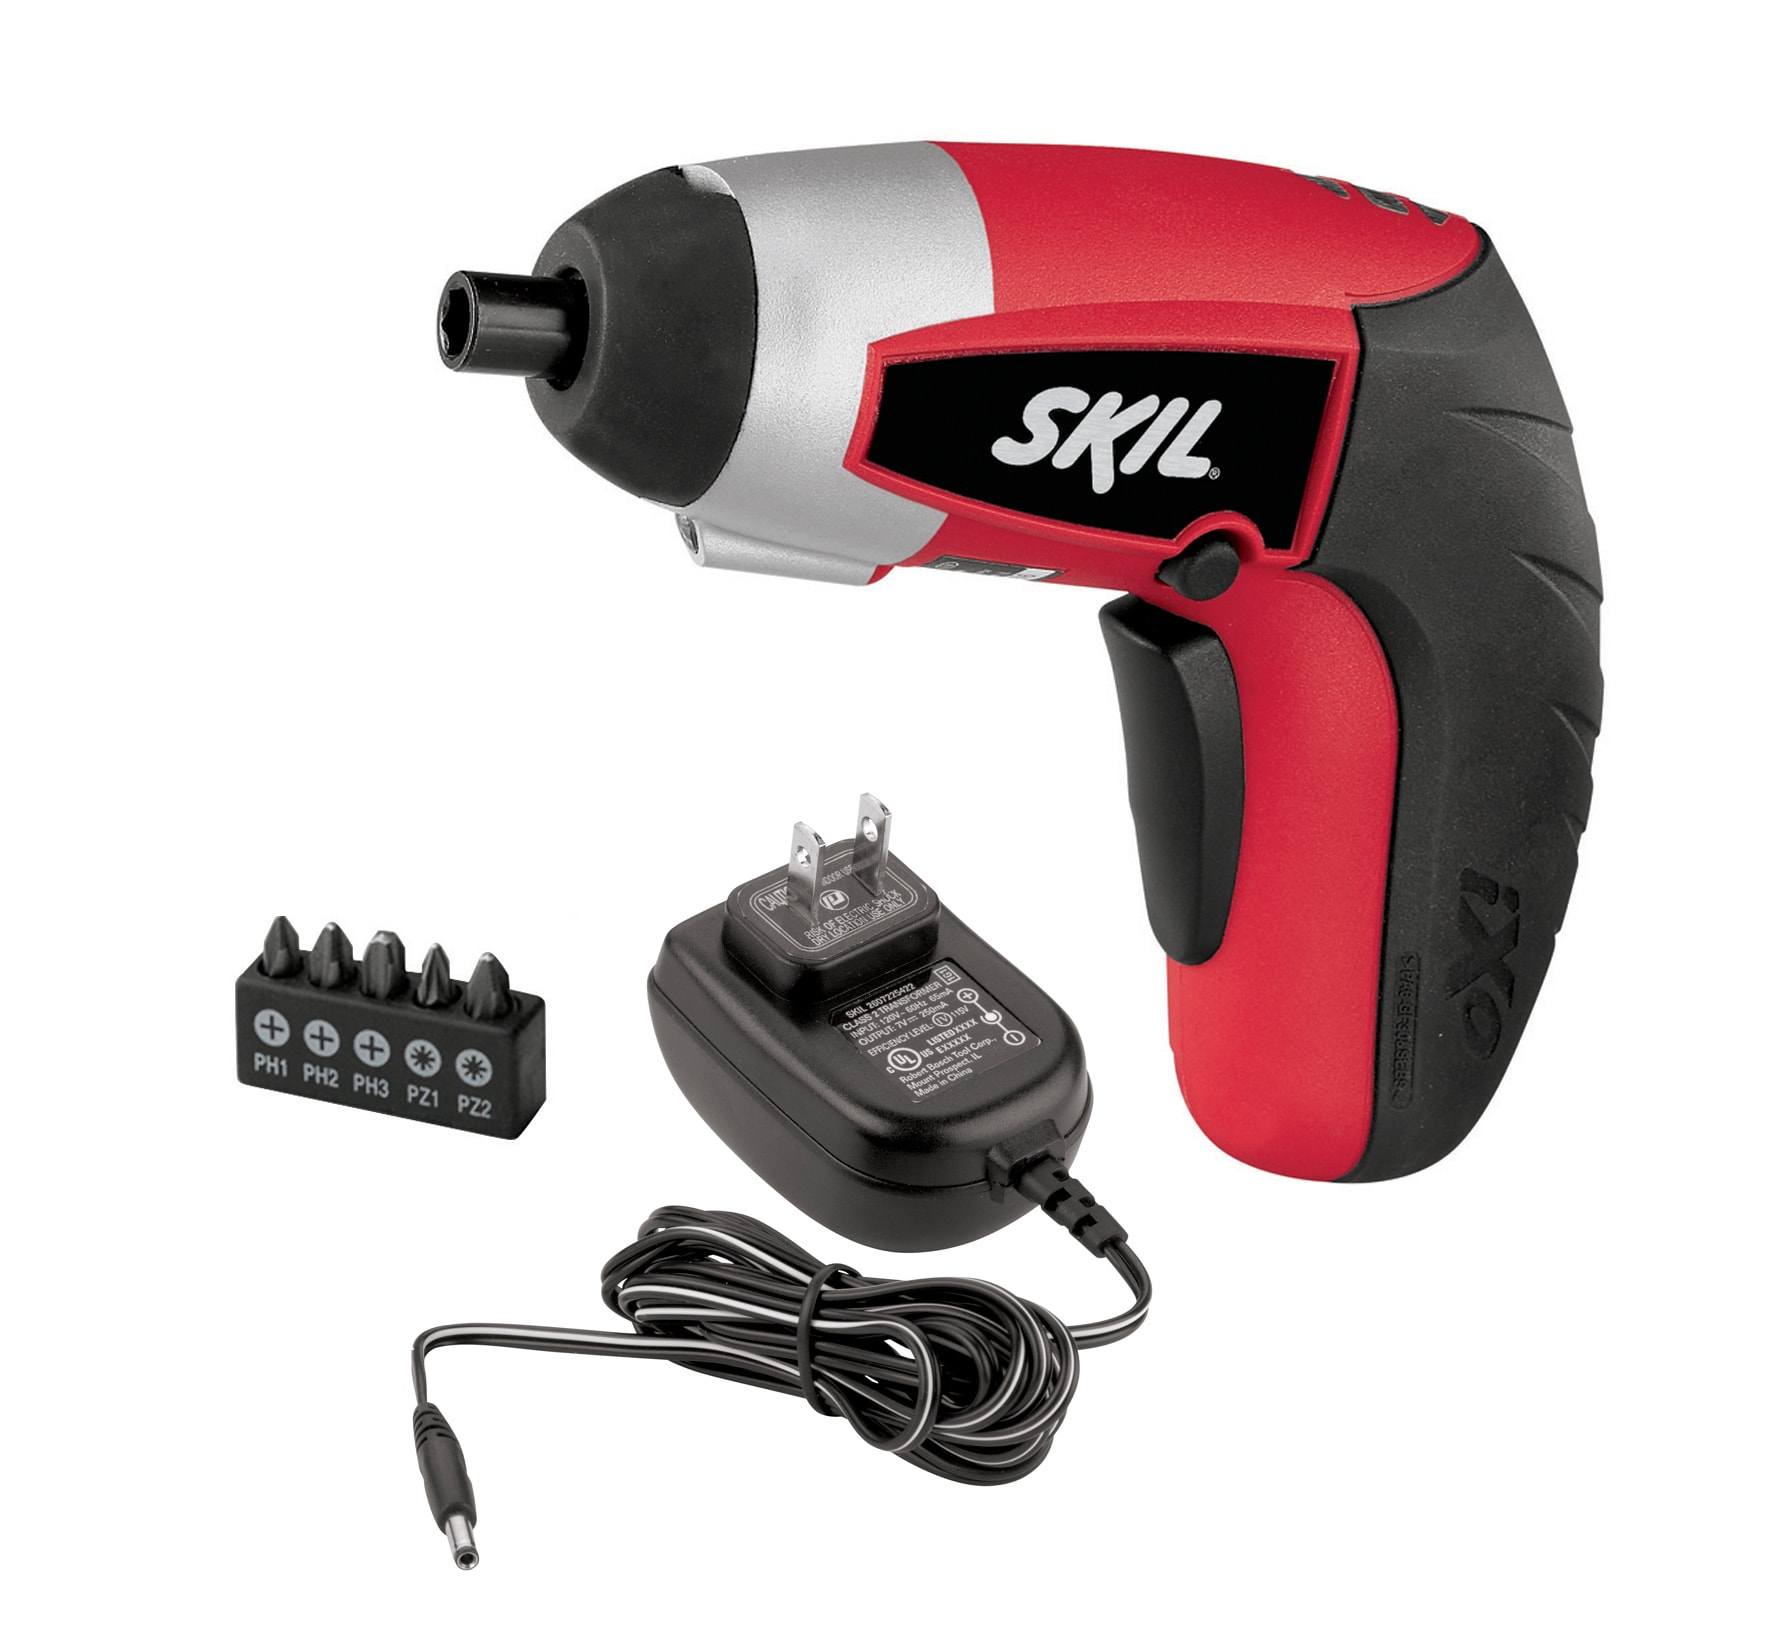 SKIL IXO 4-volt 1/4-in Cordless Drill (1-Battery Included, Charger